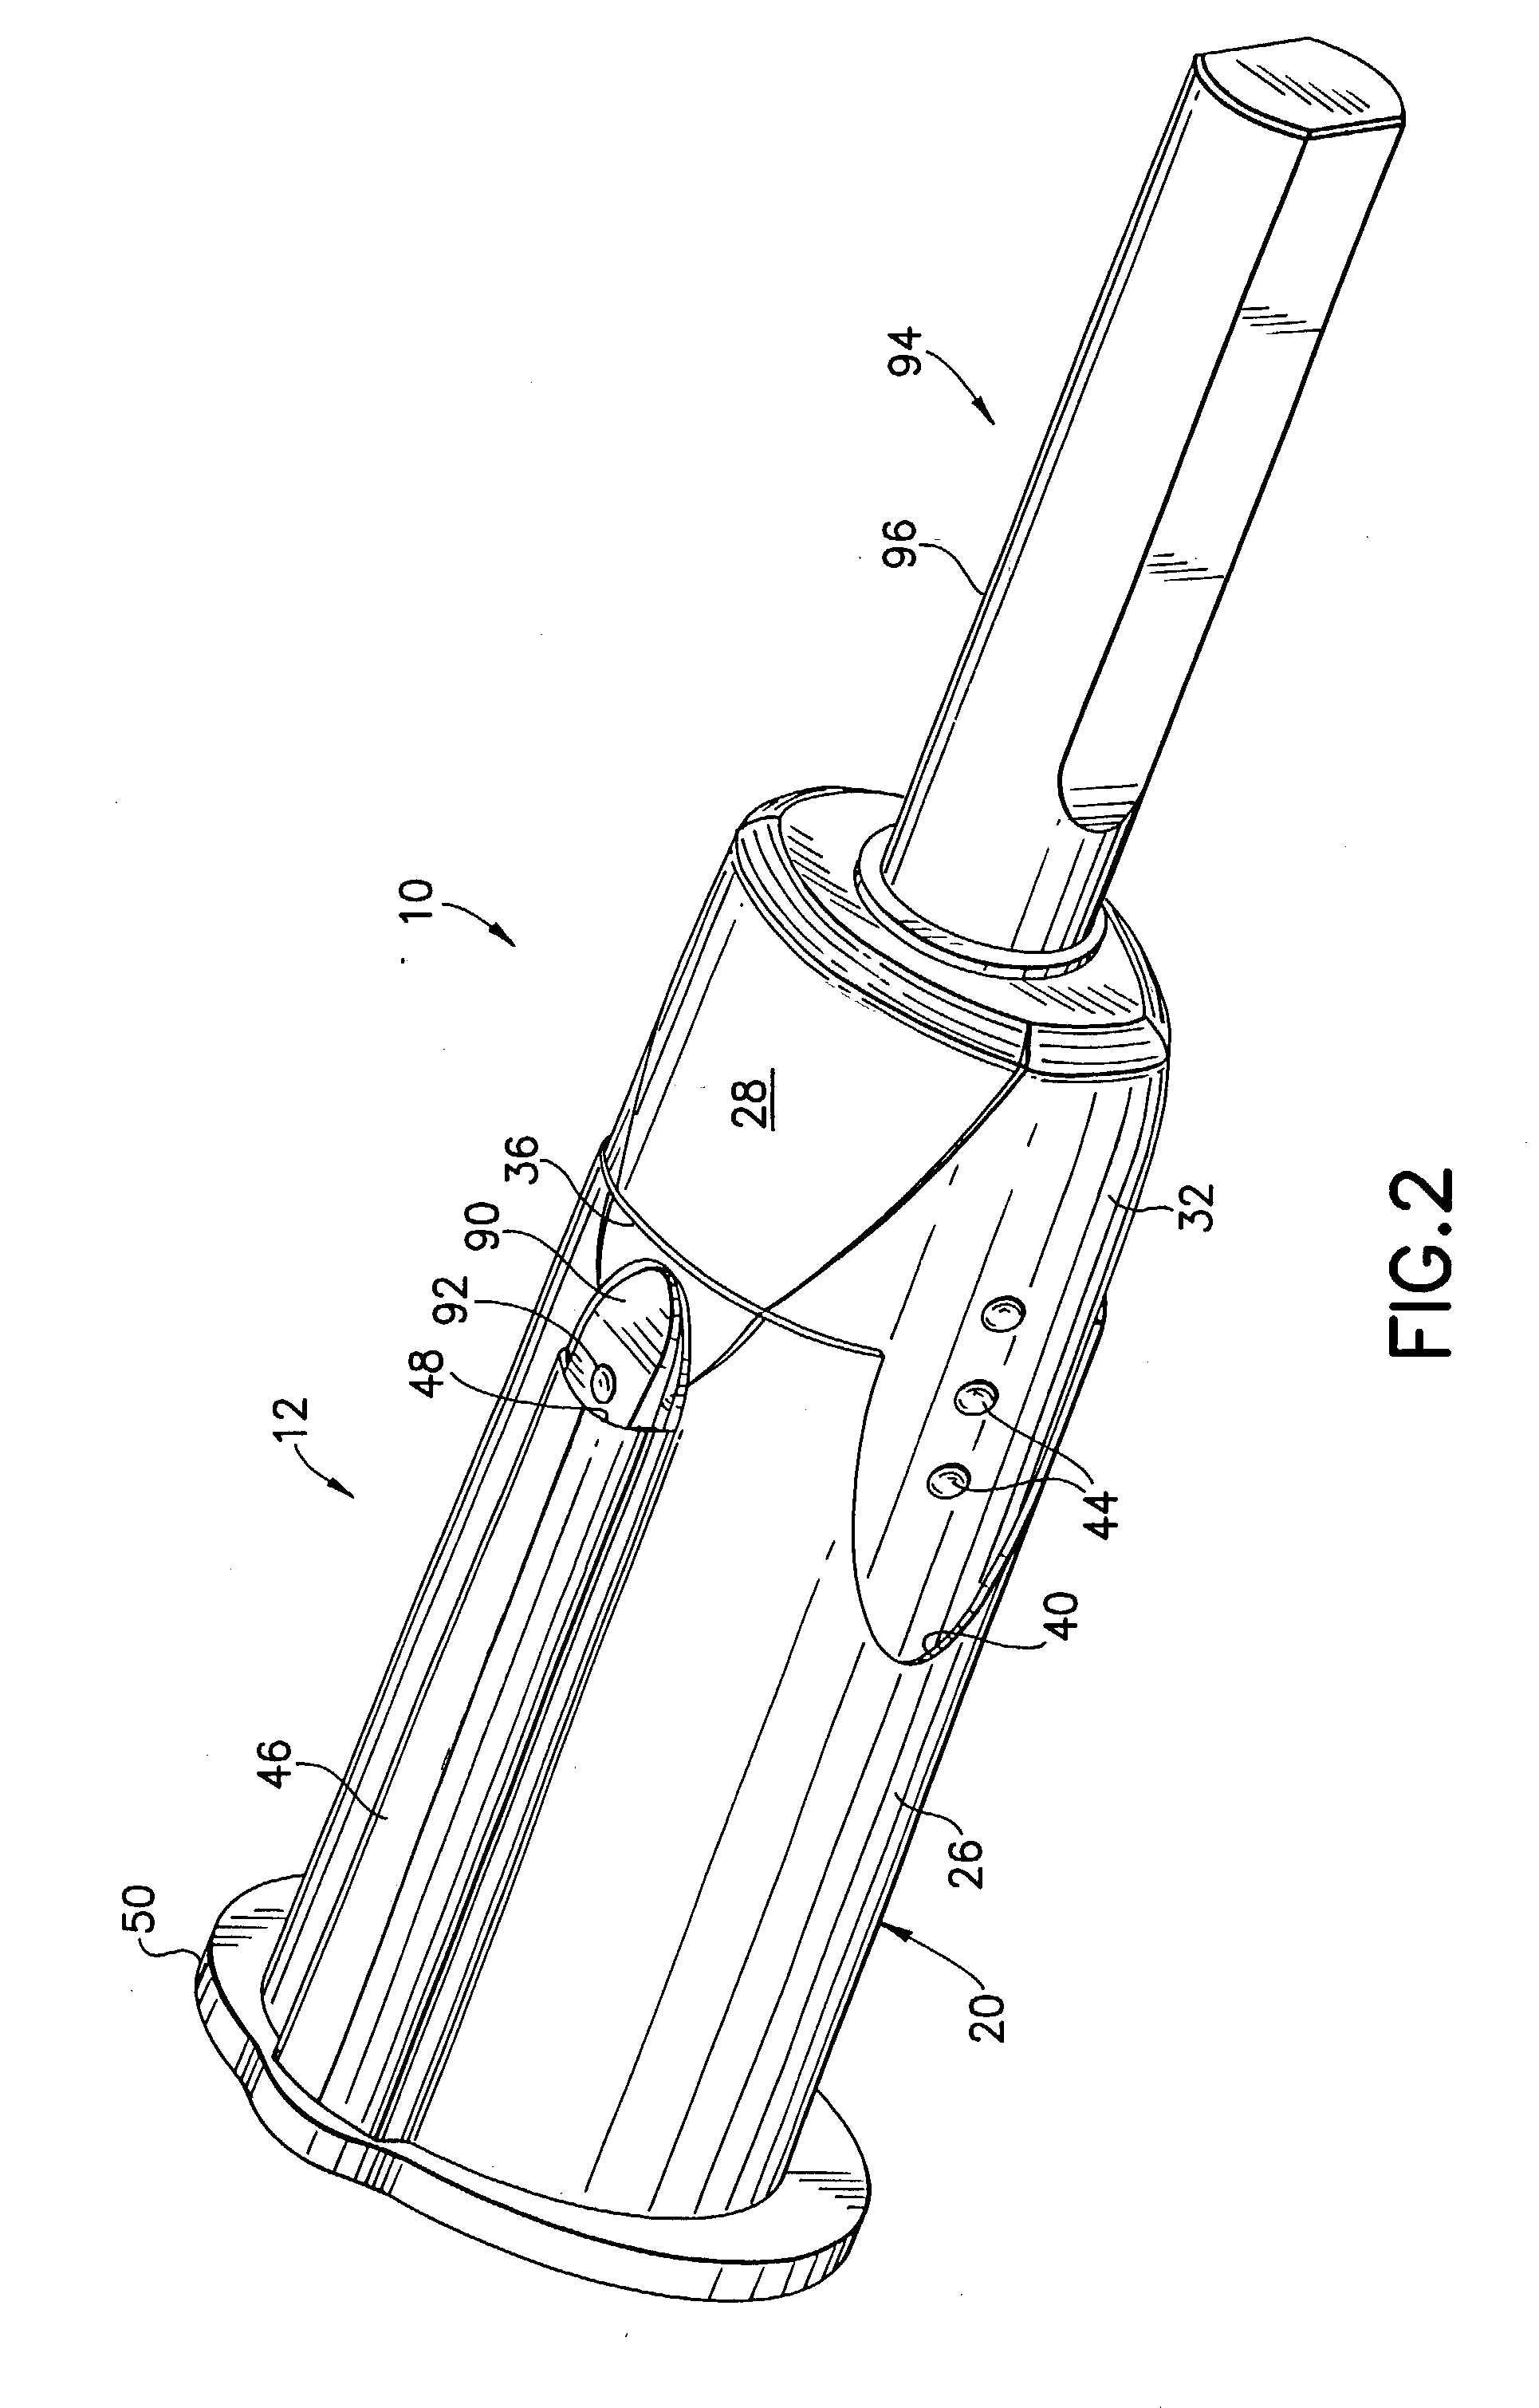 Retractable safety needle